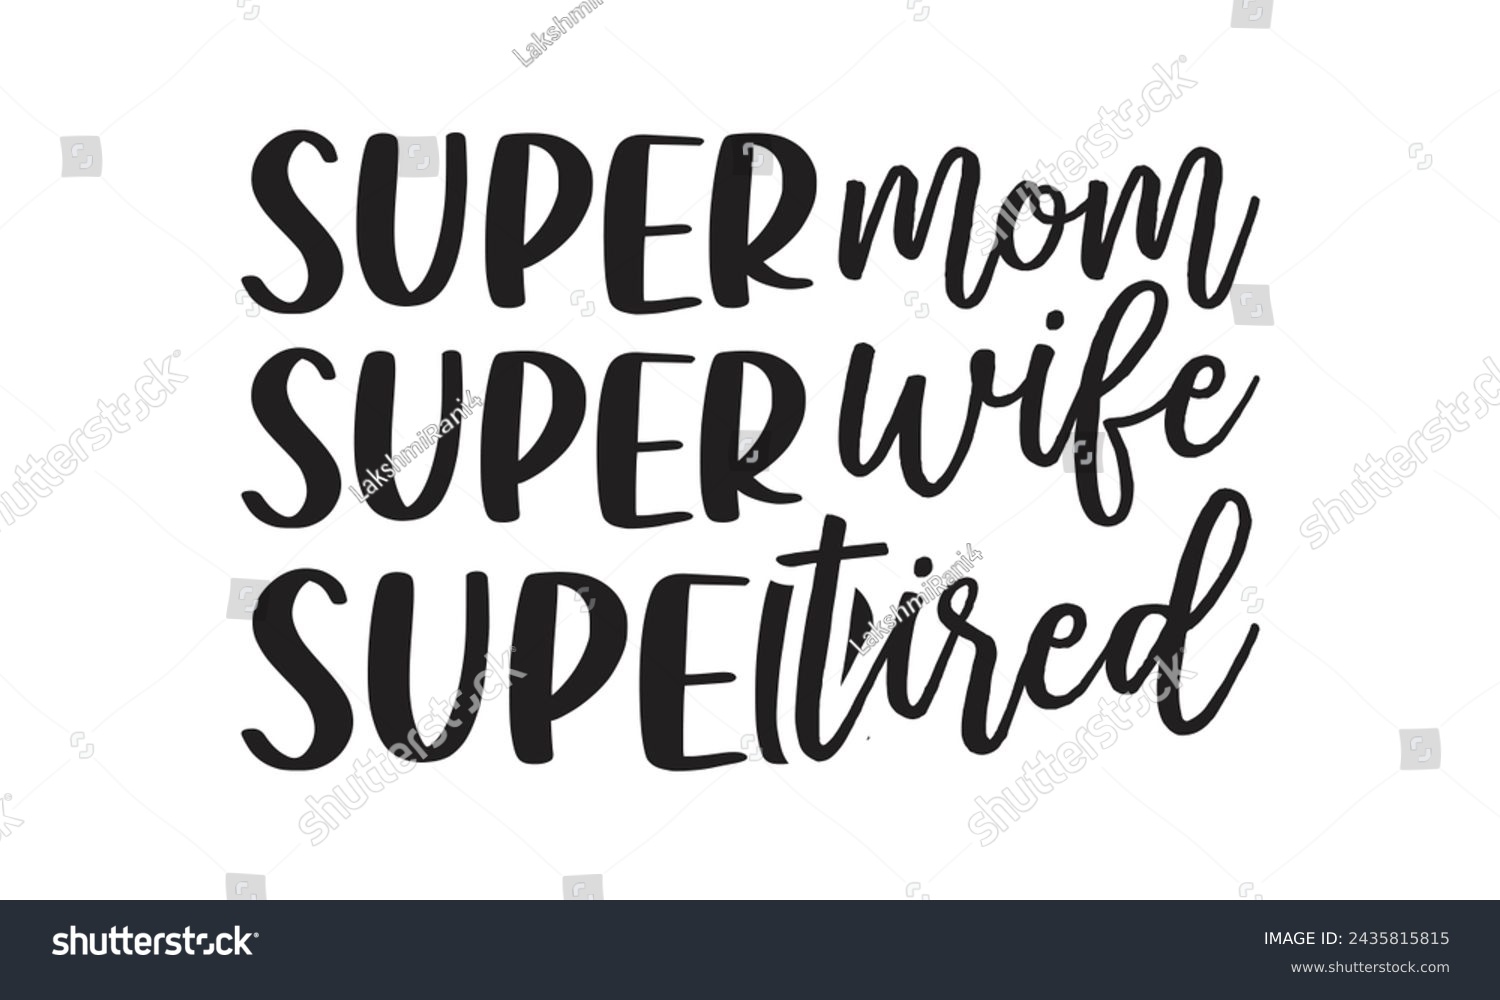 SVG of Super mom super wife super tired-  Lettering design for greeting banners, Mouse Pads, Prints, Cards and Posters, Mugs, Notebooks, Floor Pillows and T-shirt prints design. svg